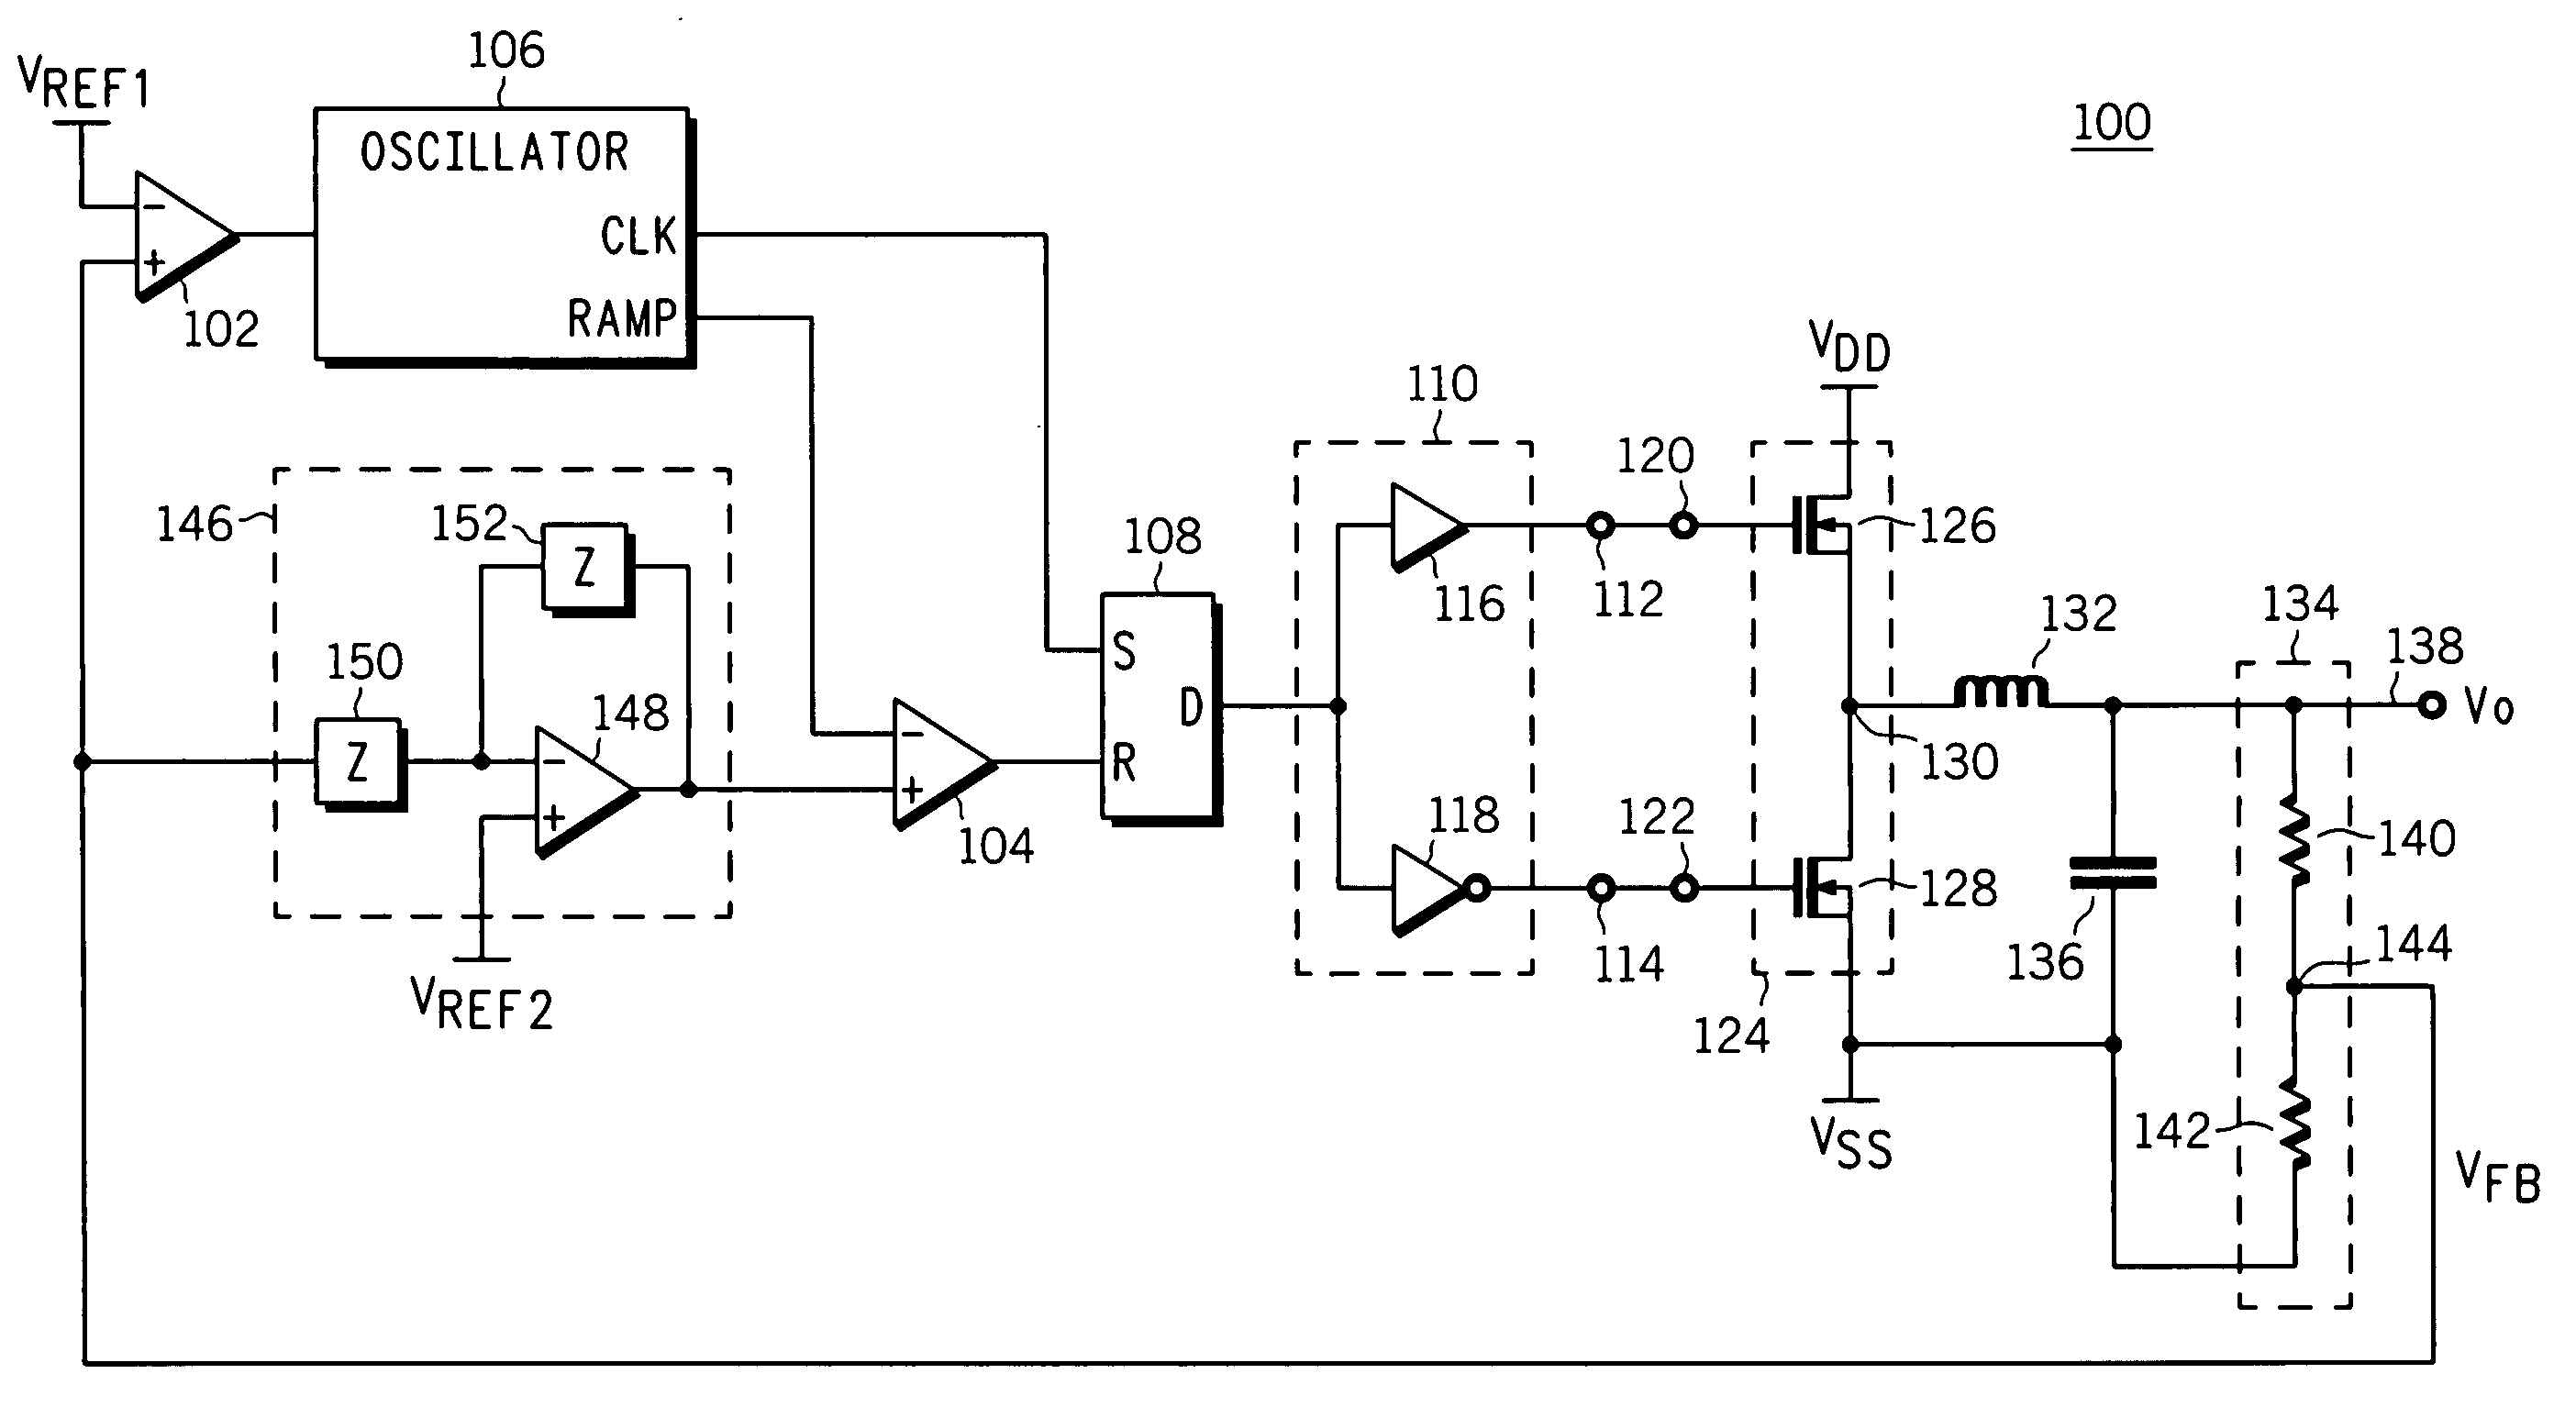 Method for regulating an output signal and circuit therefor